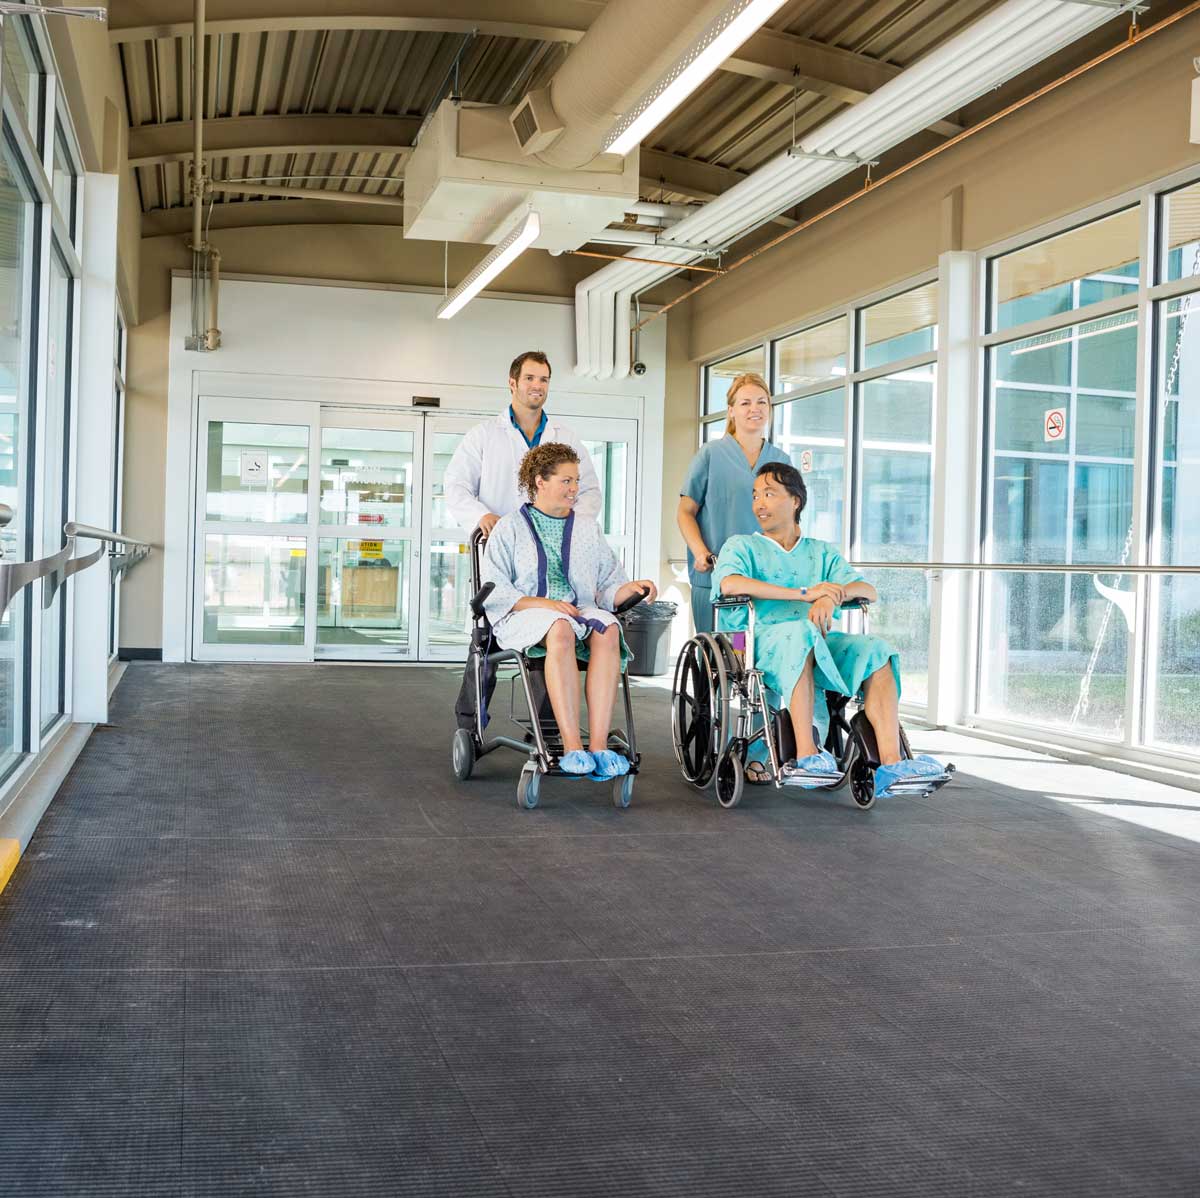 Medical Team Pushing Patients On Wheelchairs At Hospital Corridor